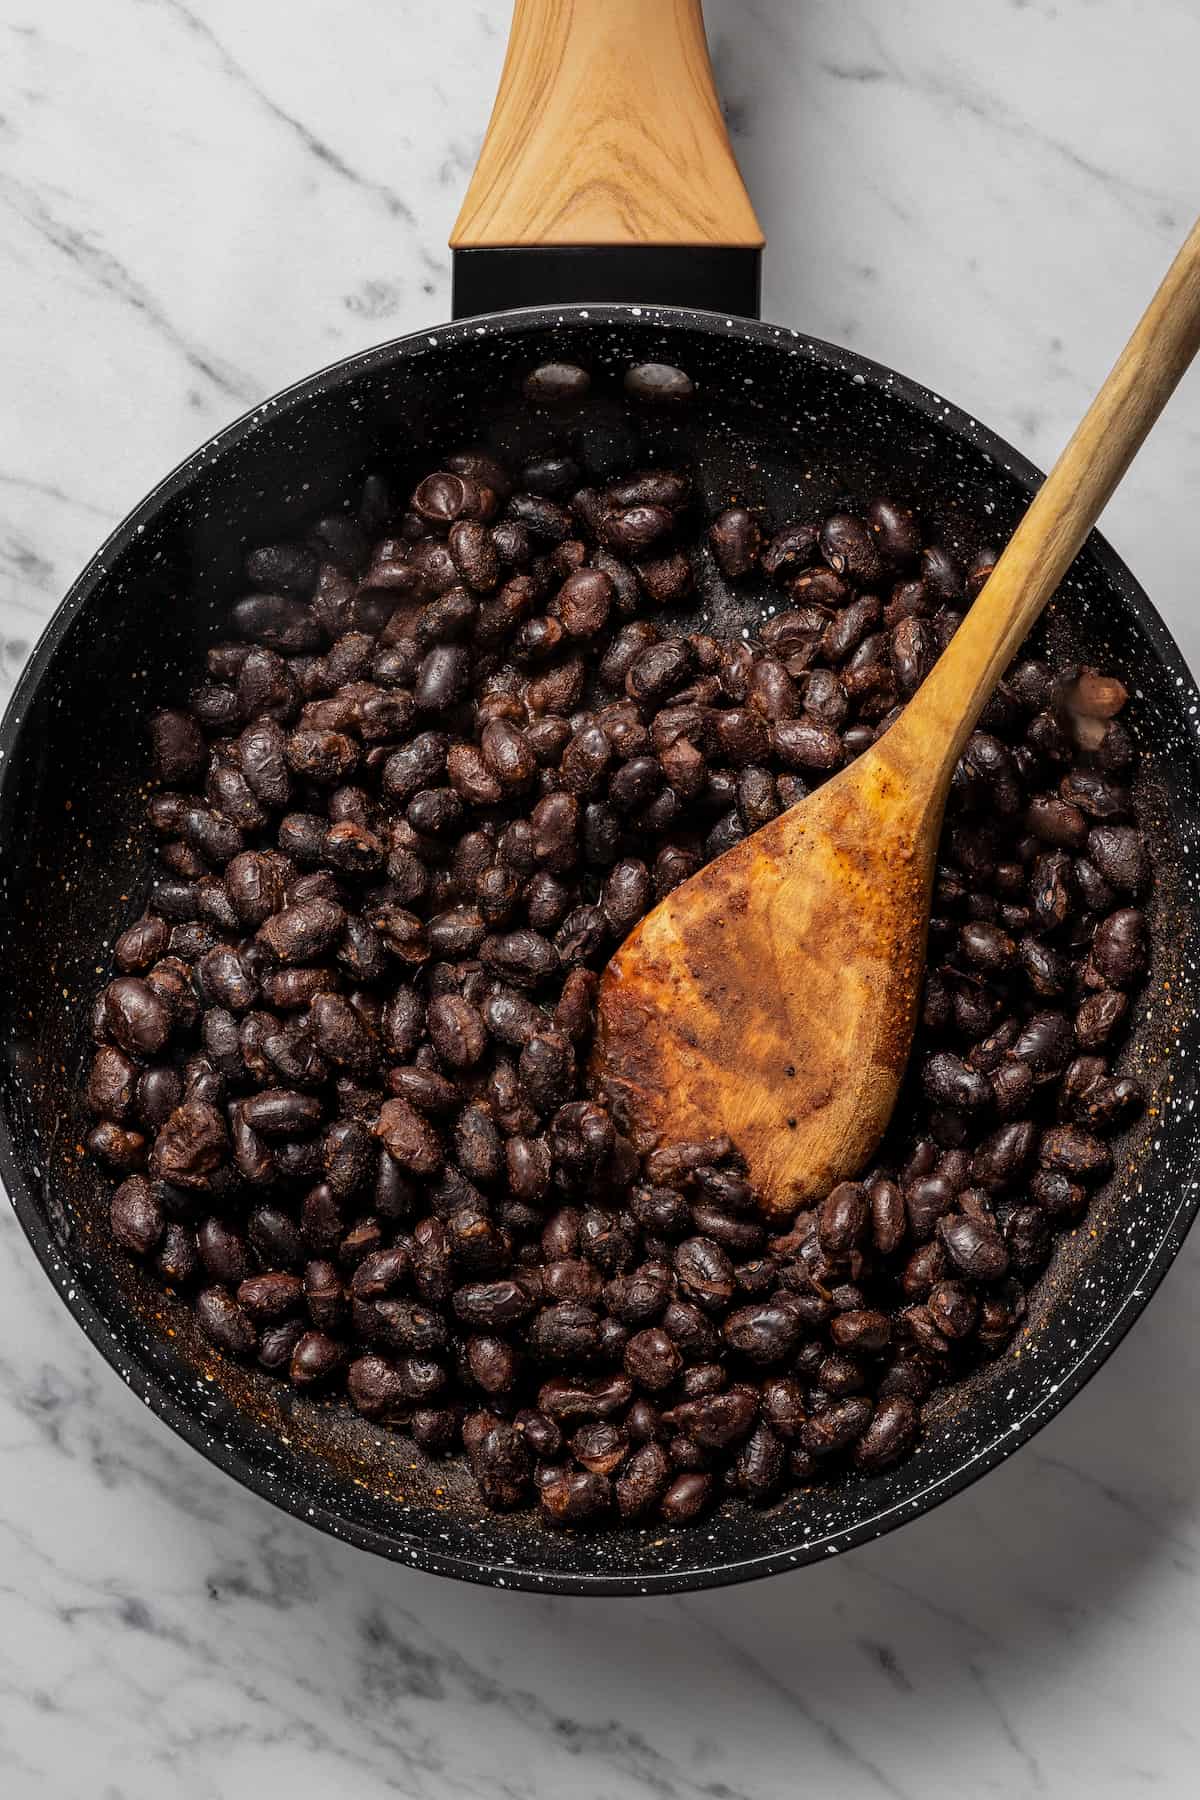 Cooking black beans in a skillet.